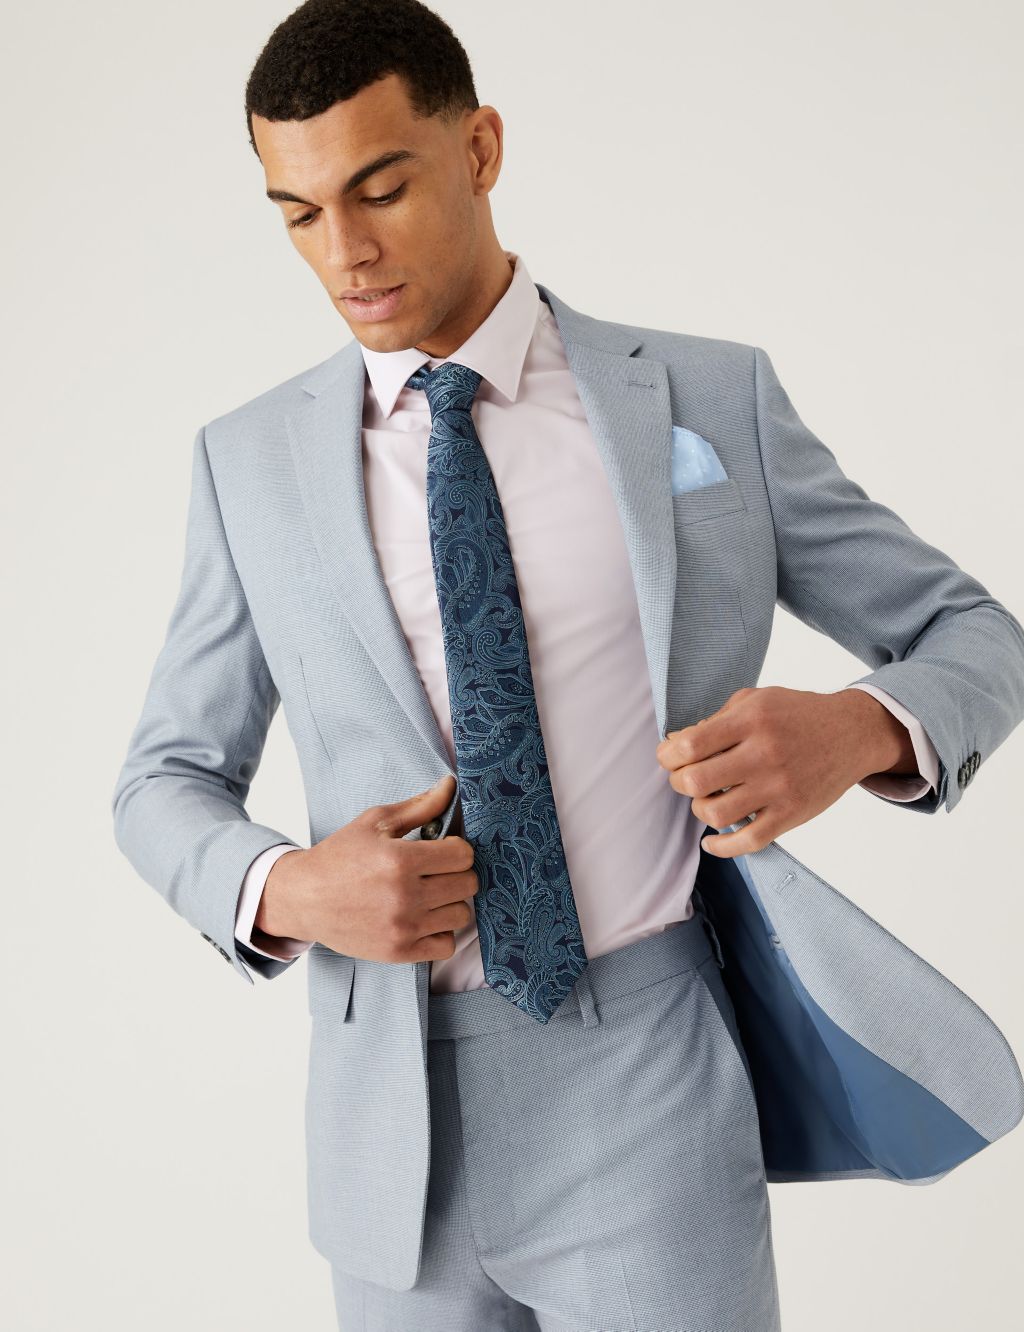 Slim Fit Micro Puppytooth Suit Jacket image 3